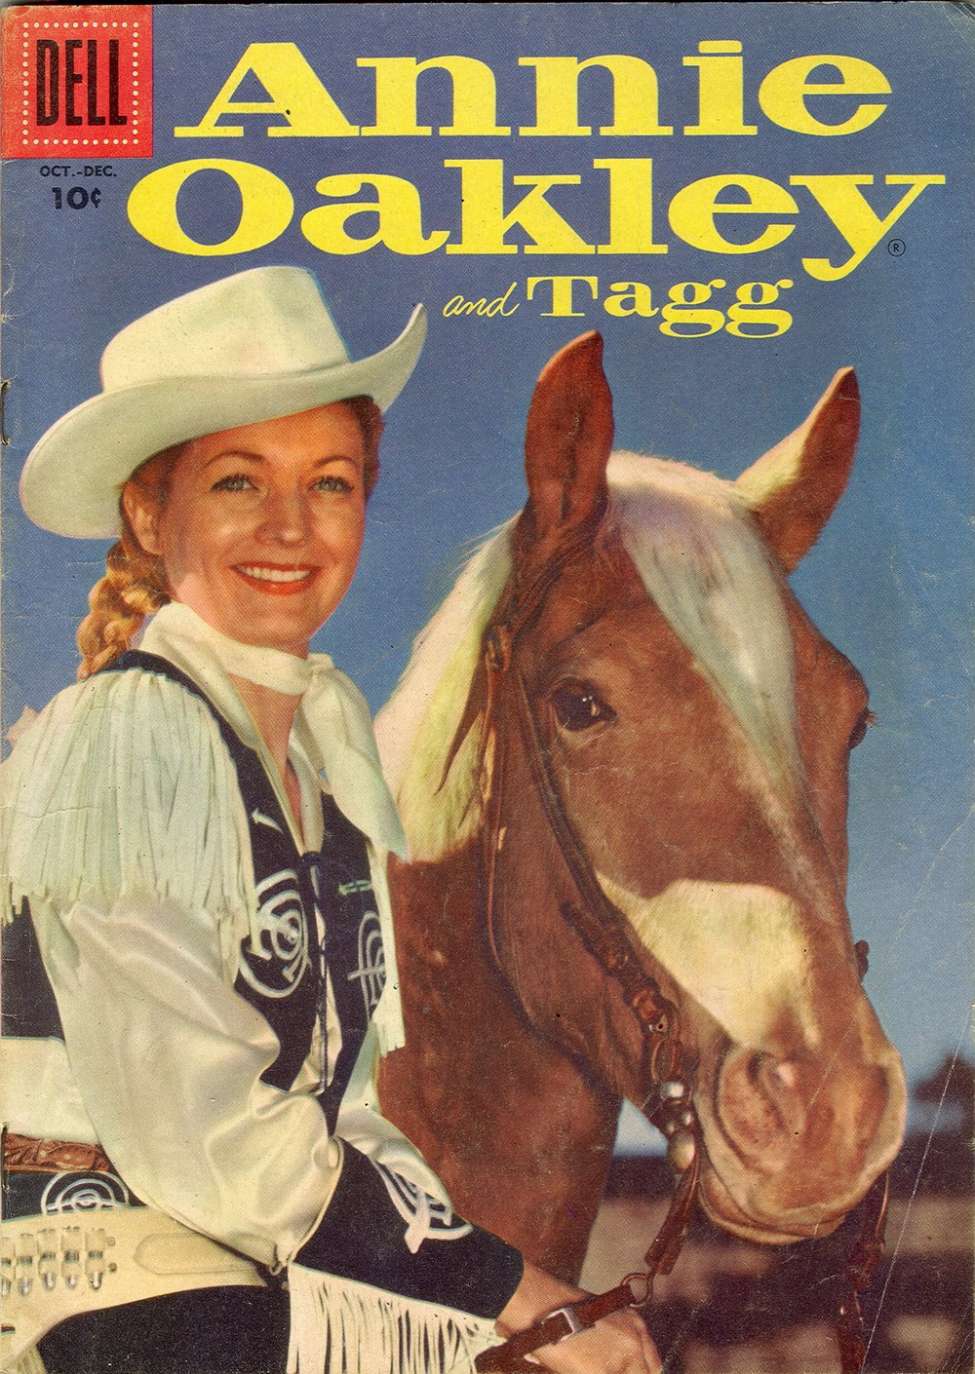 Annie Oakley and Tagg 09 (Dell Comics / Western Publishing)